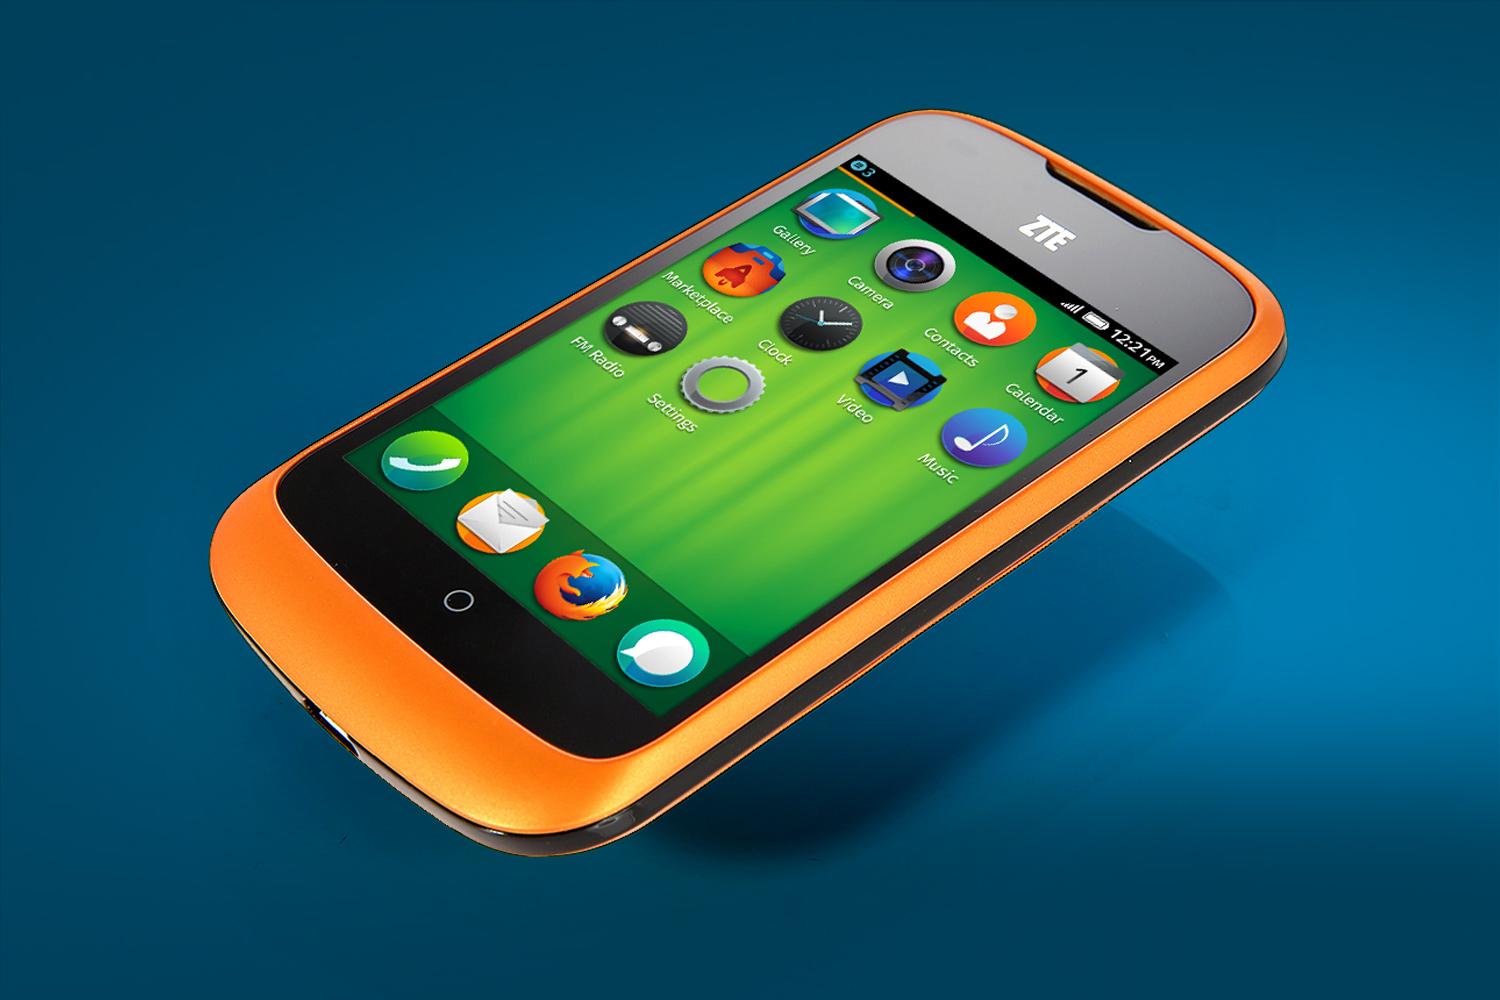 Is Mozilla's mobile OS good for games? See for yourself - CNET